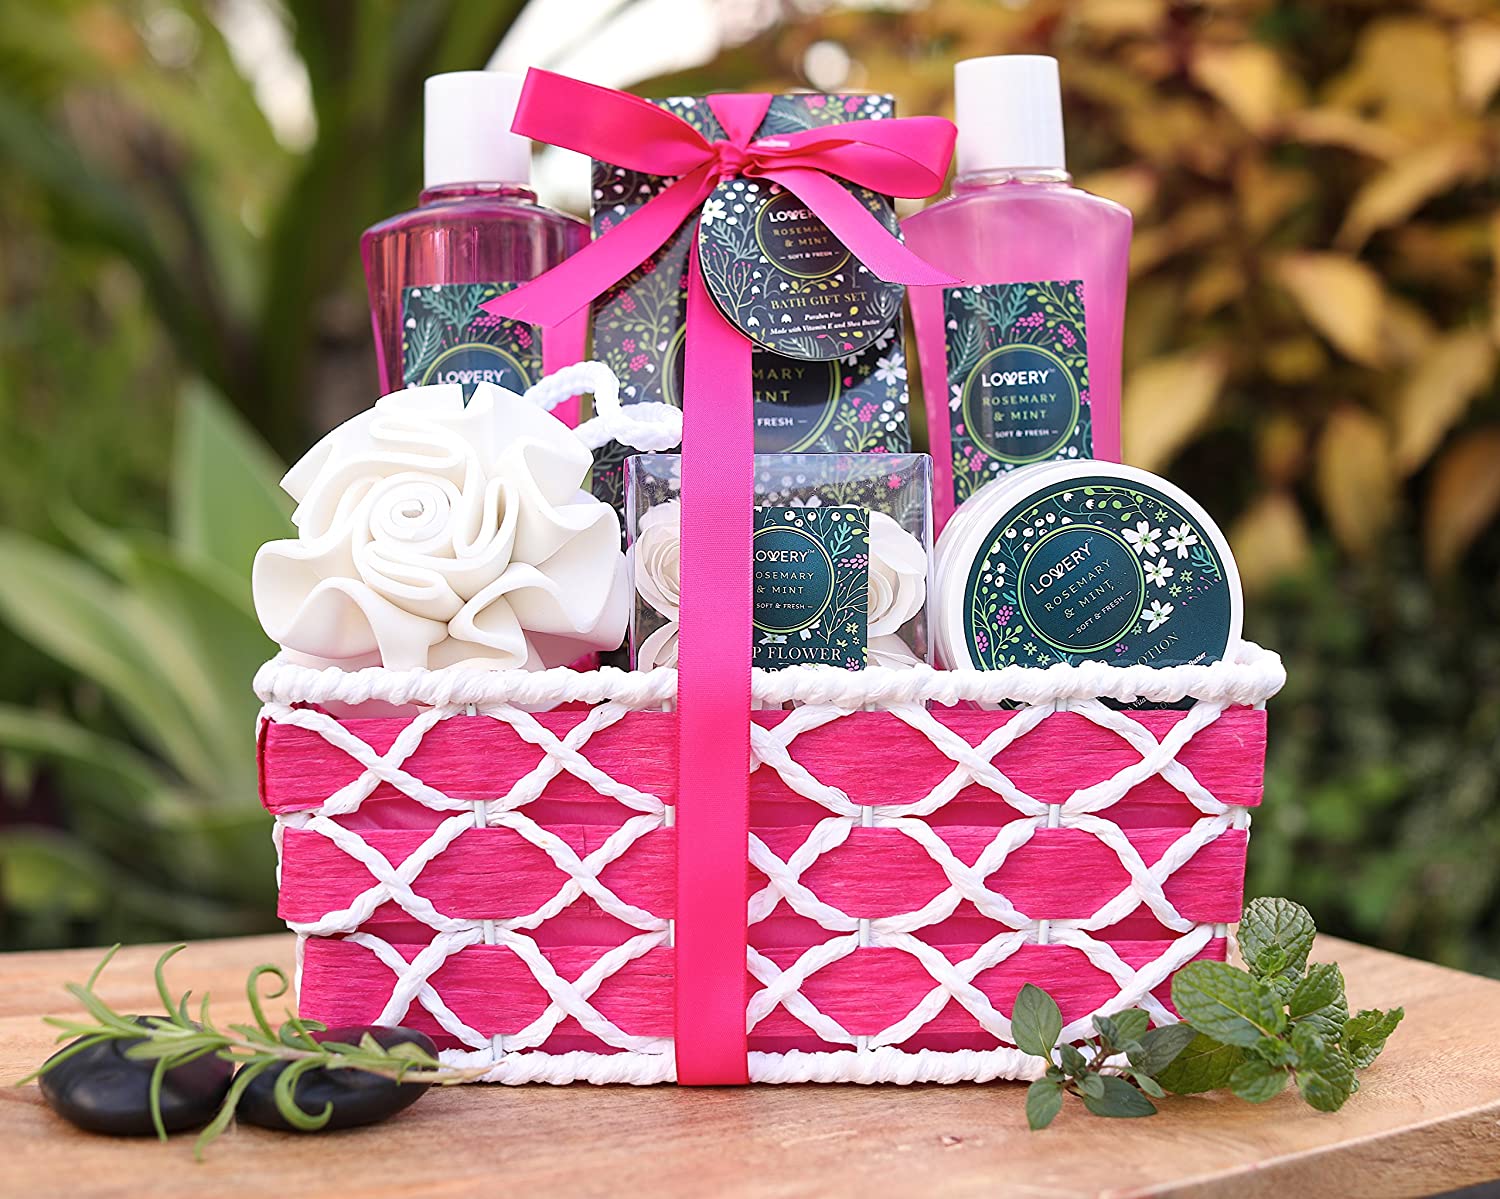 Birthday Gifts for Women-Relaxing Spa Gift Box Basket for Her Mom Sister Best Friend Unique Happy Birthday Bath Set Gift Ideas -Best Birthday Gift